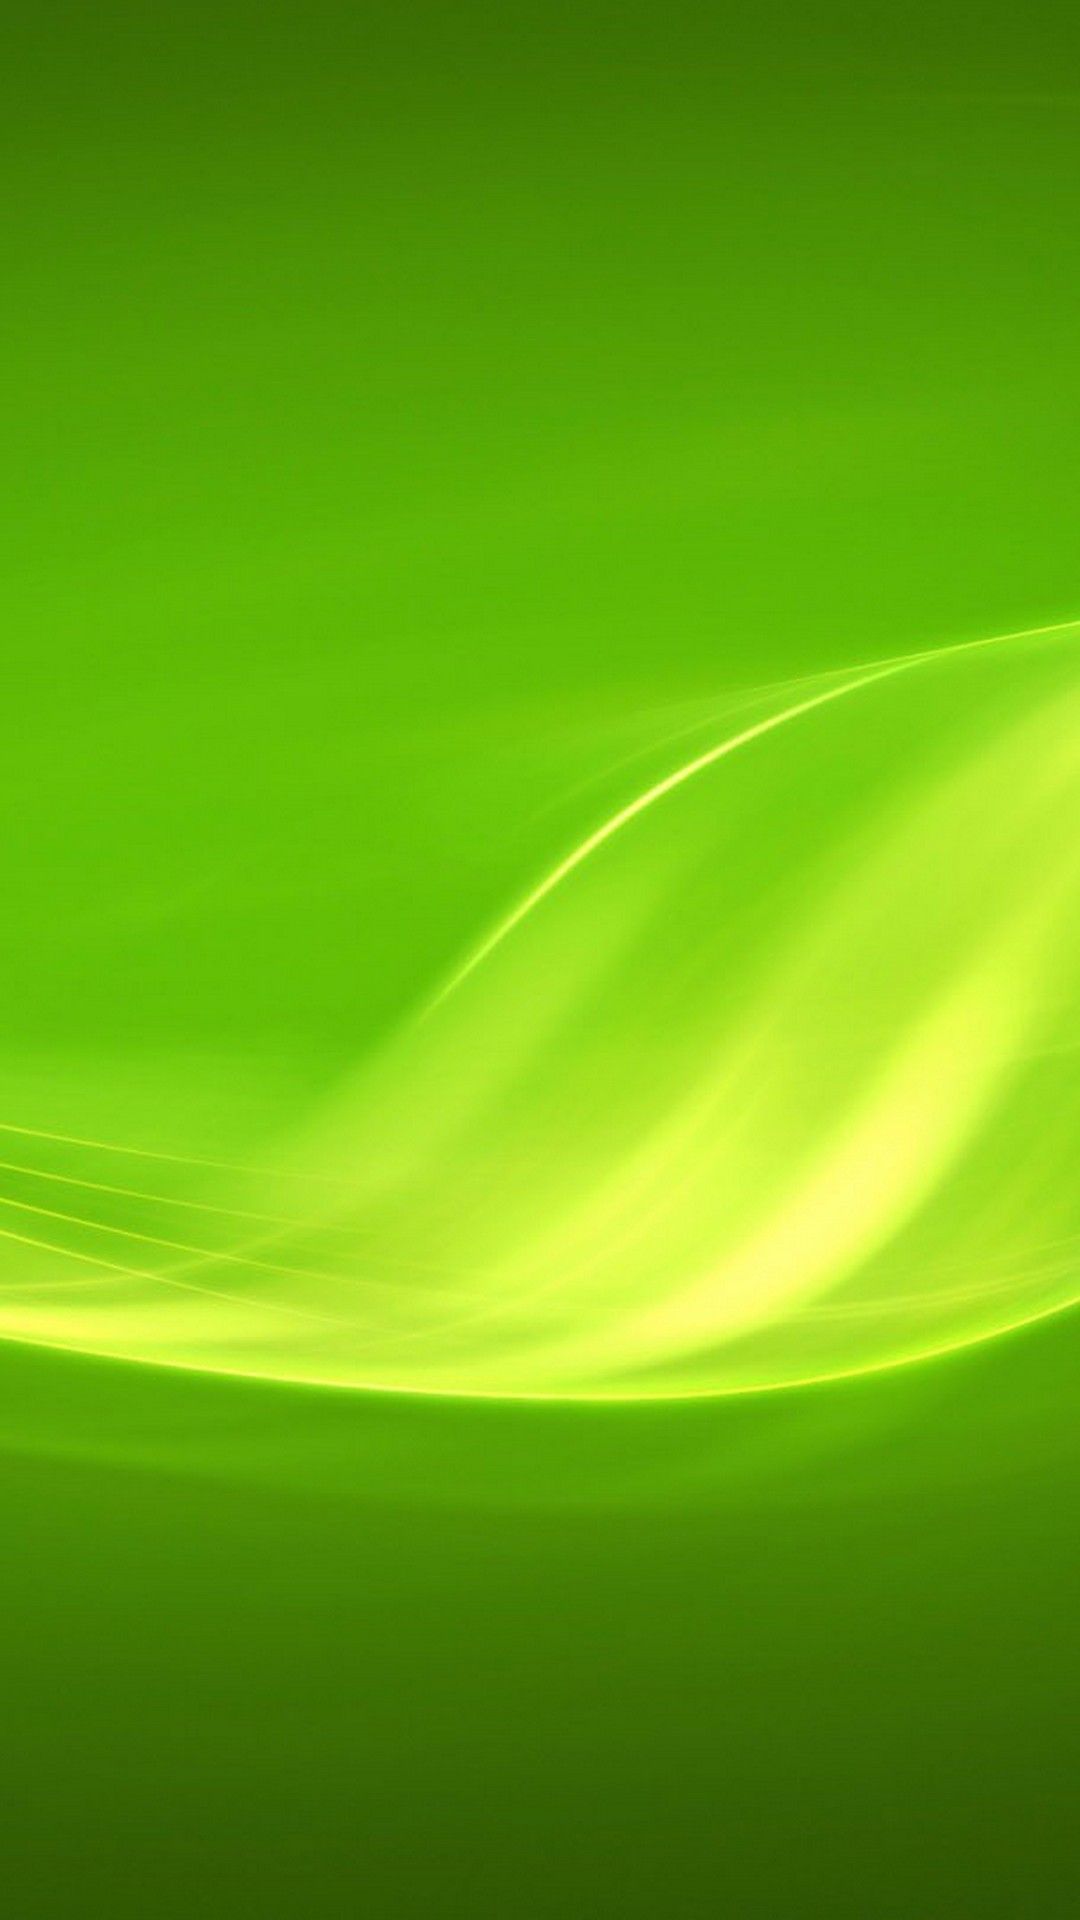 Lime Green HD Wallpaper For Android Android Wallpaper